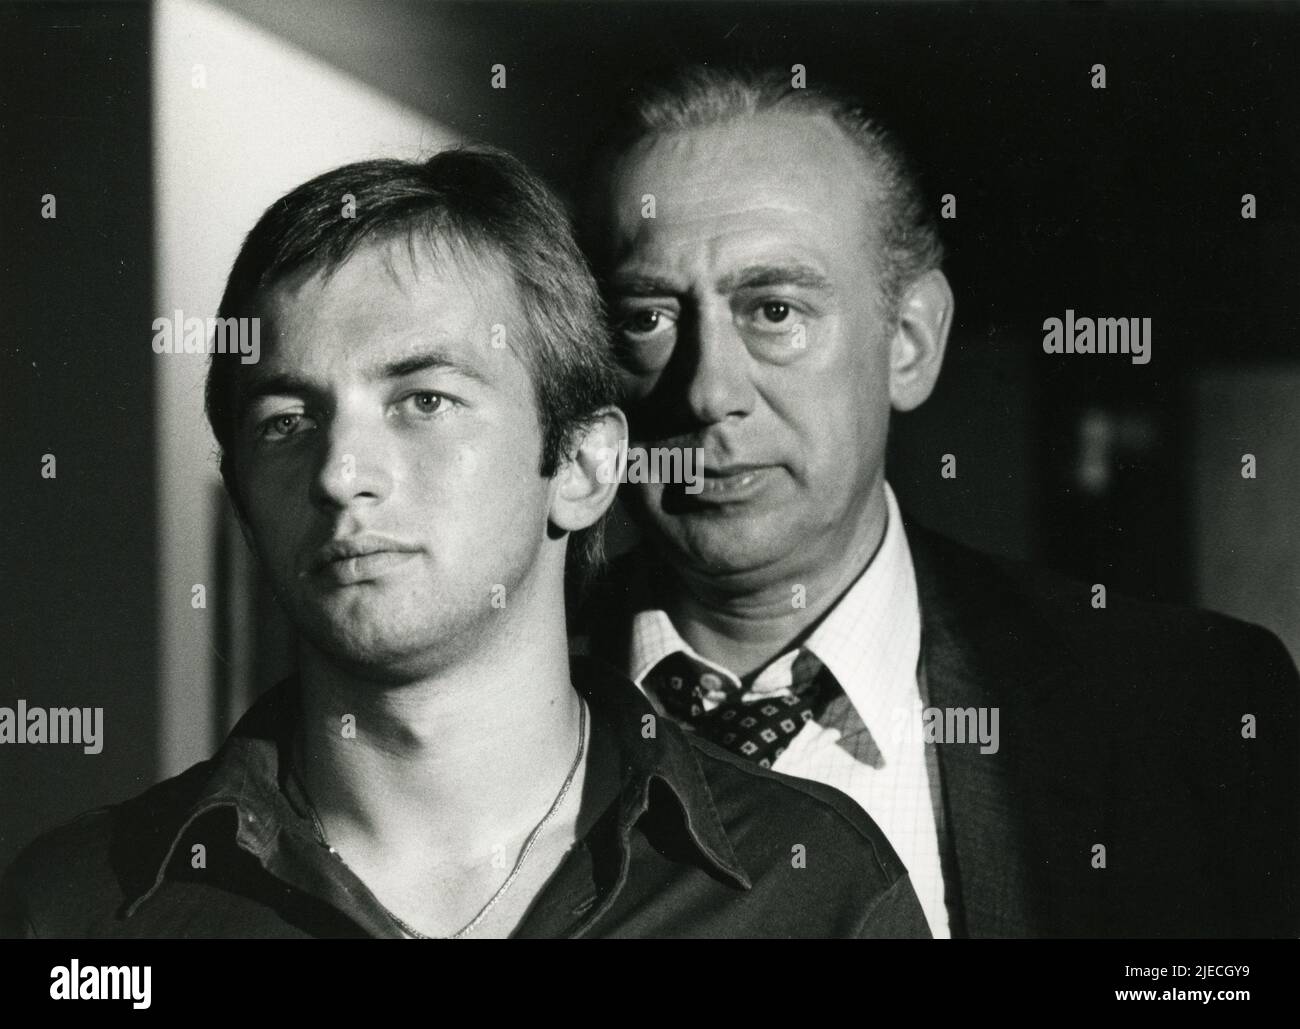 German actors Horst Tappert and Wolfgang Muller in the TV Series Derrick, Germany 1975 Stock Photo